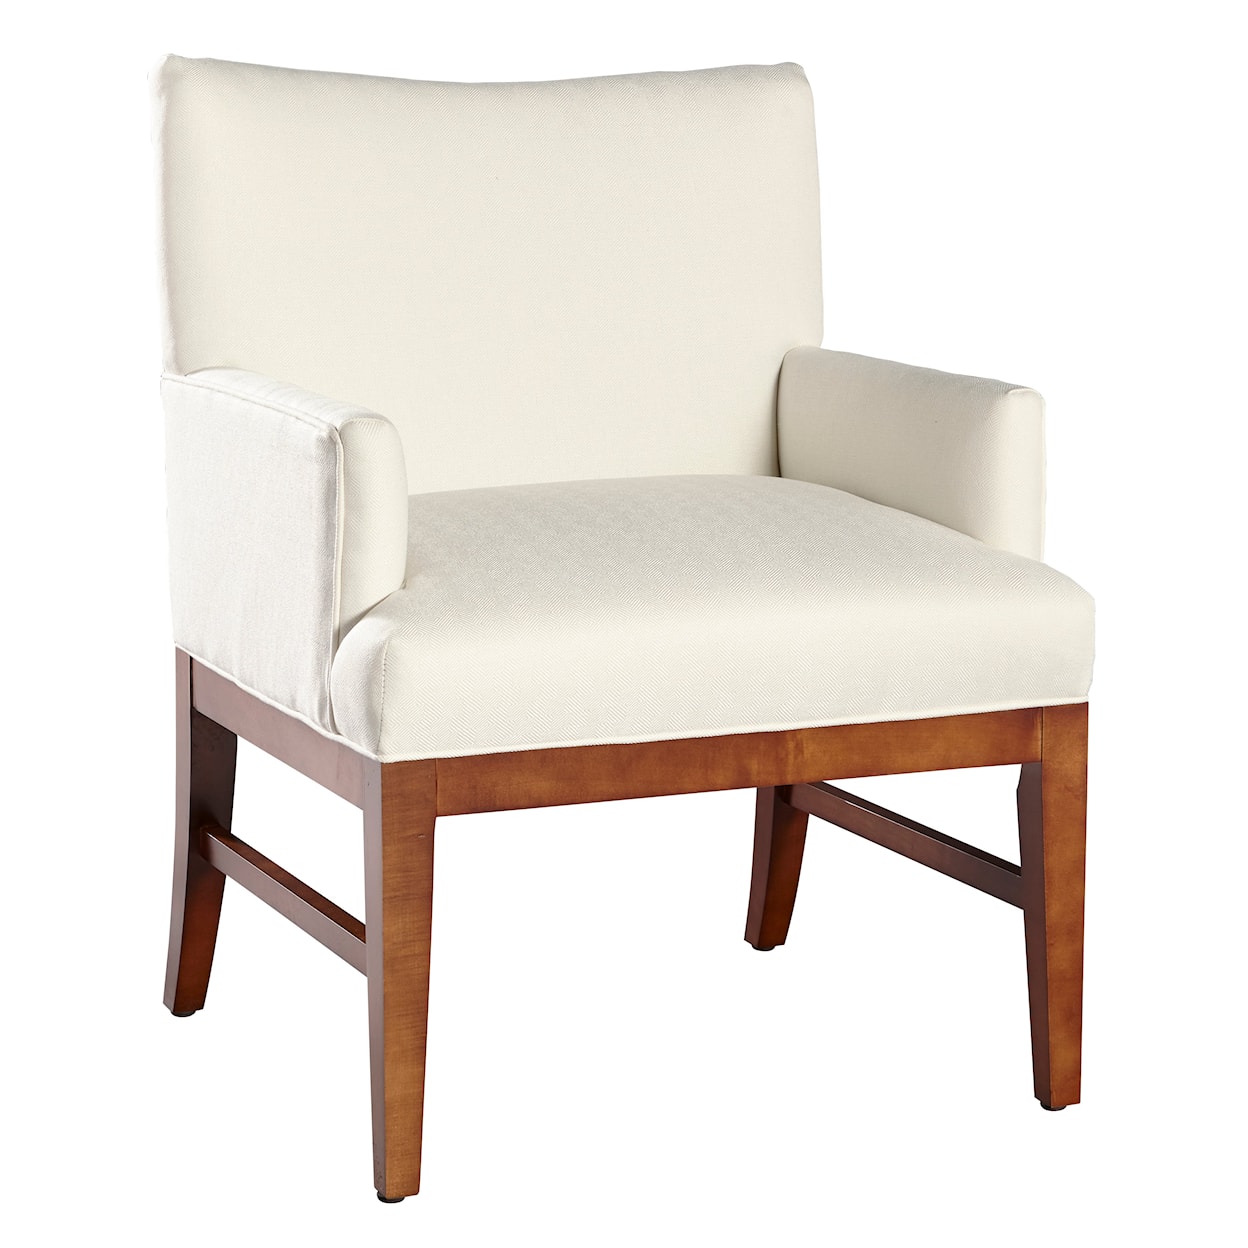 Hekman Upholstery Lyra Accent Chair